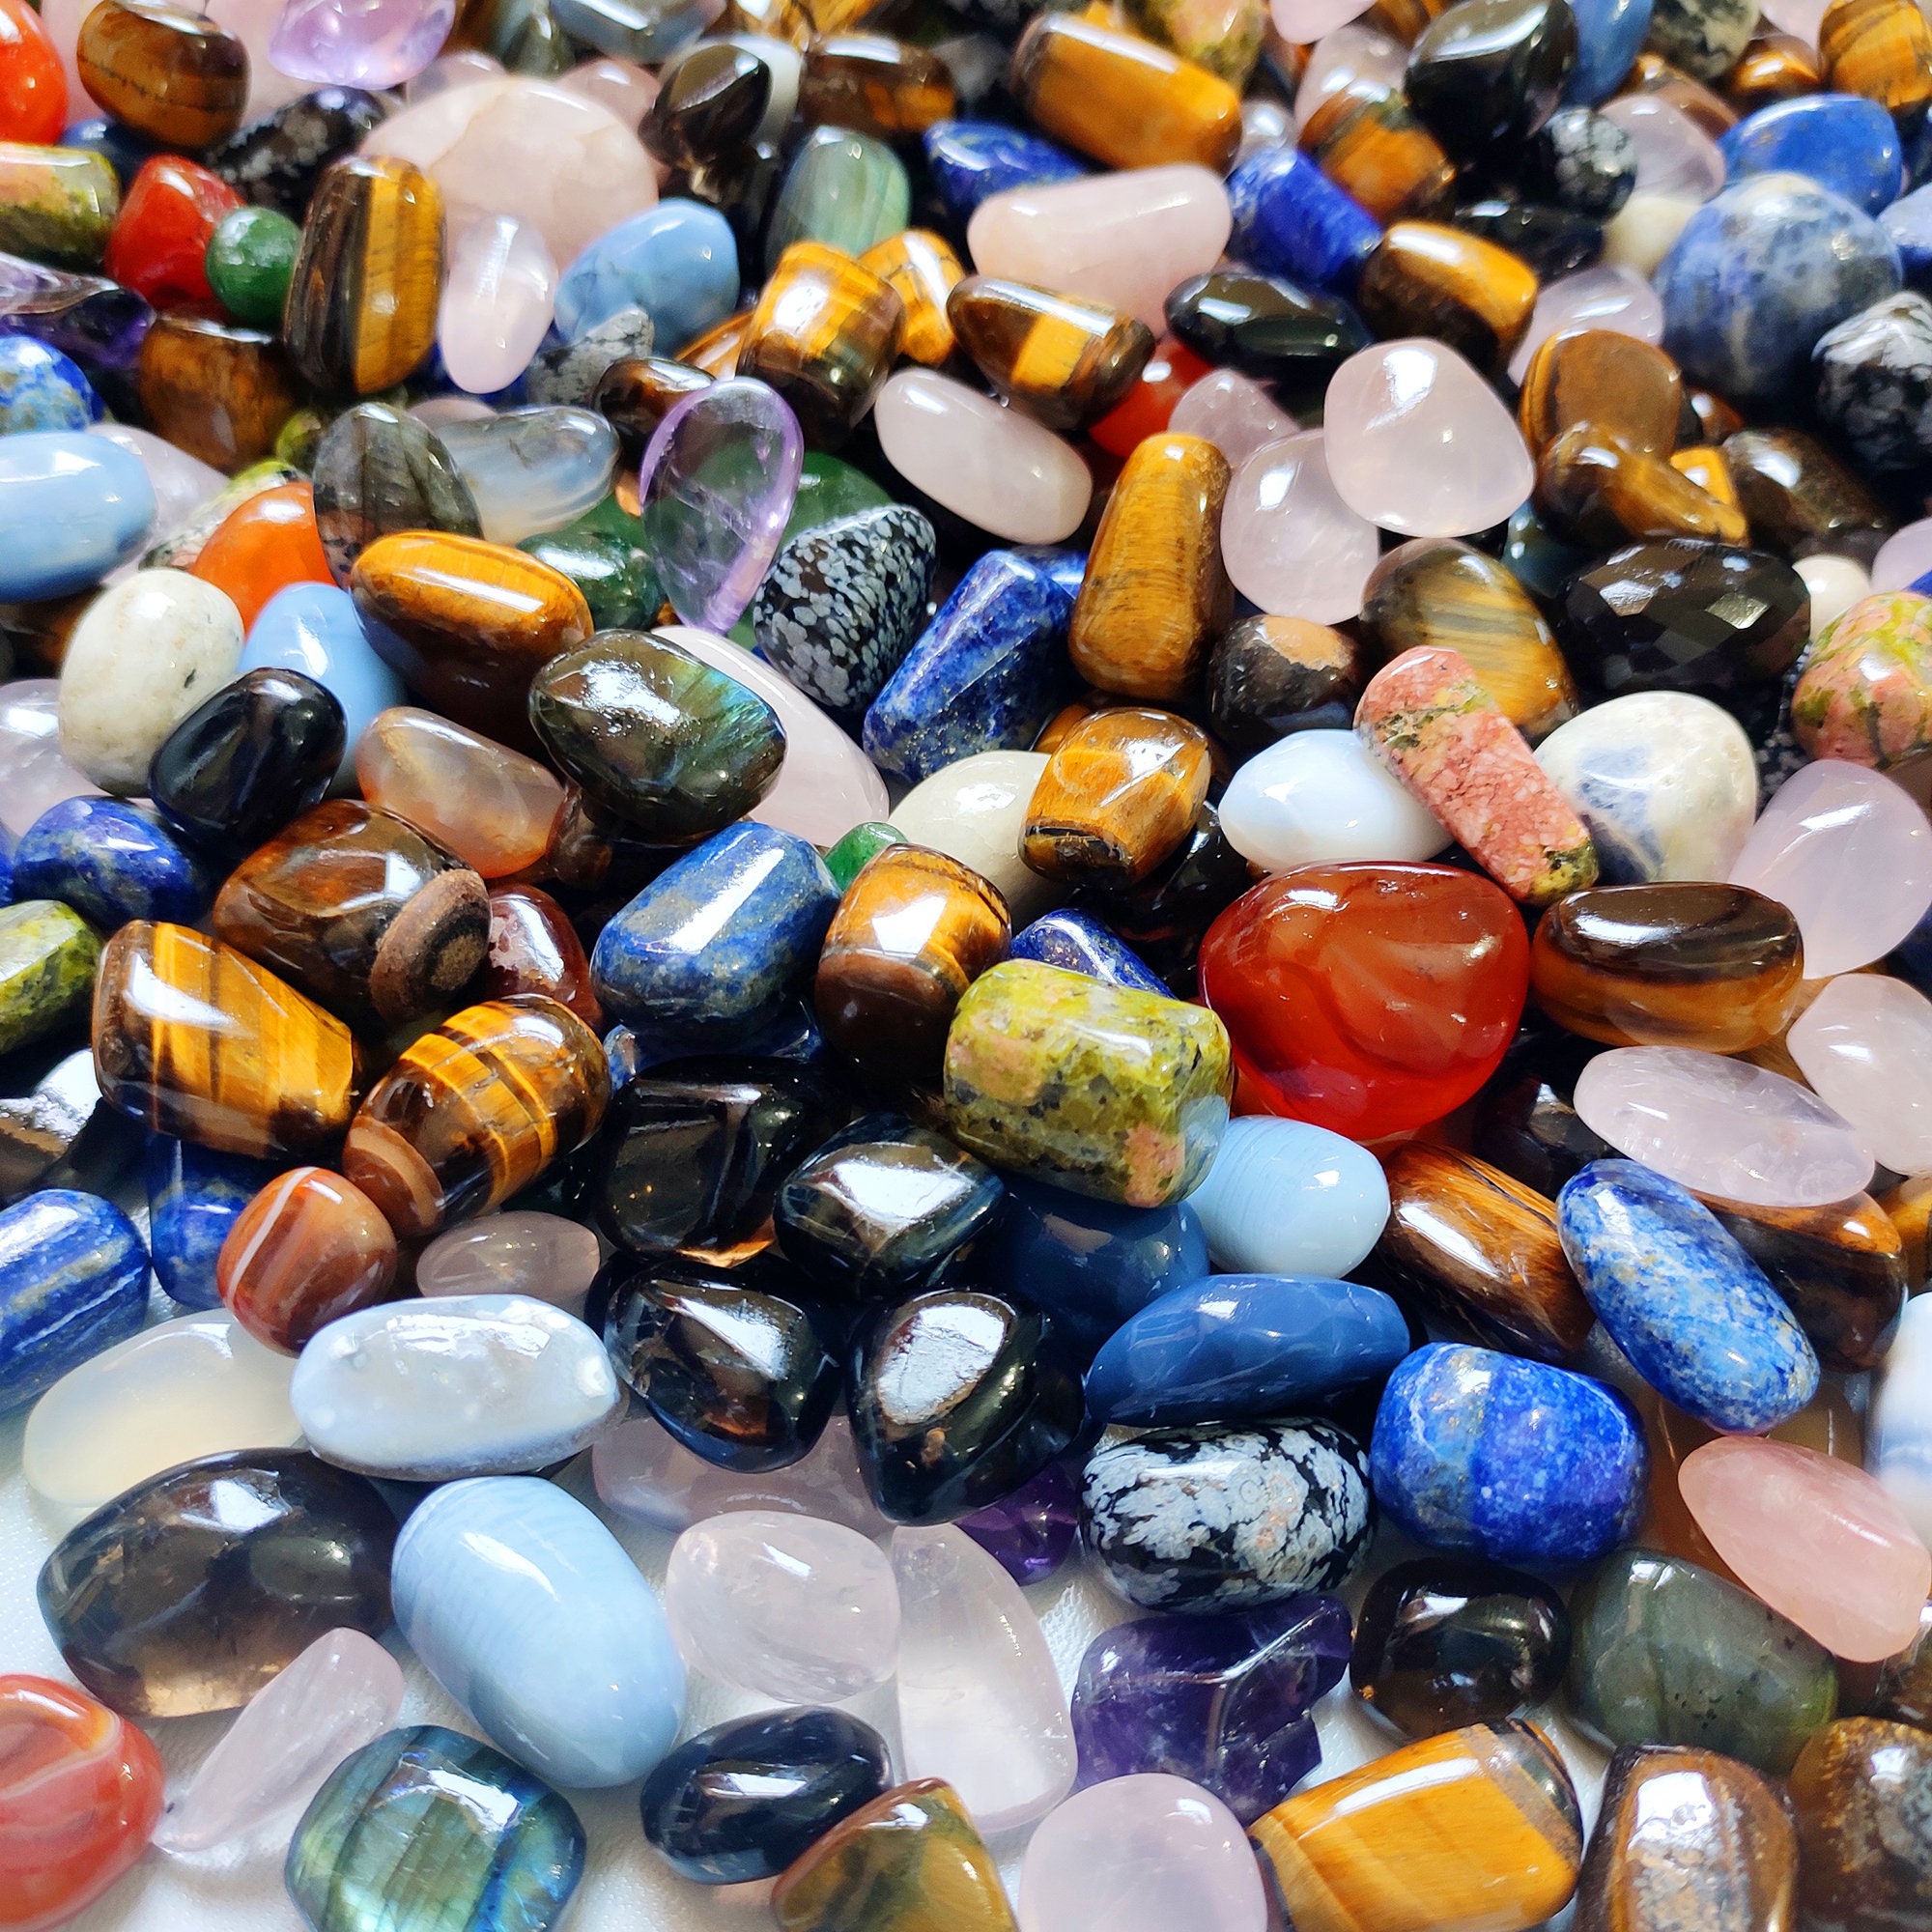 WHOLESALE CRYSTALS UK, Bulk, For Jewelry, Pendants, Crystal Lot, Crystals  Small, Crystals Tumbled, Vender, Bulk Crystals, Gemstones